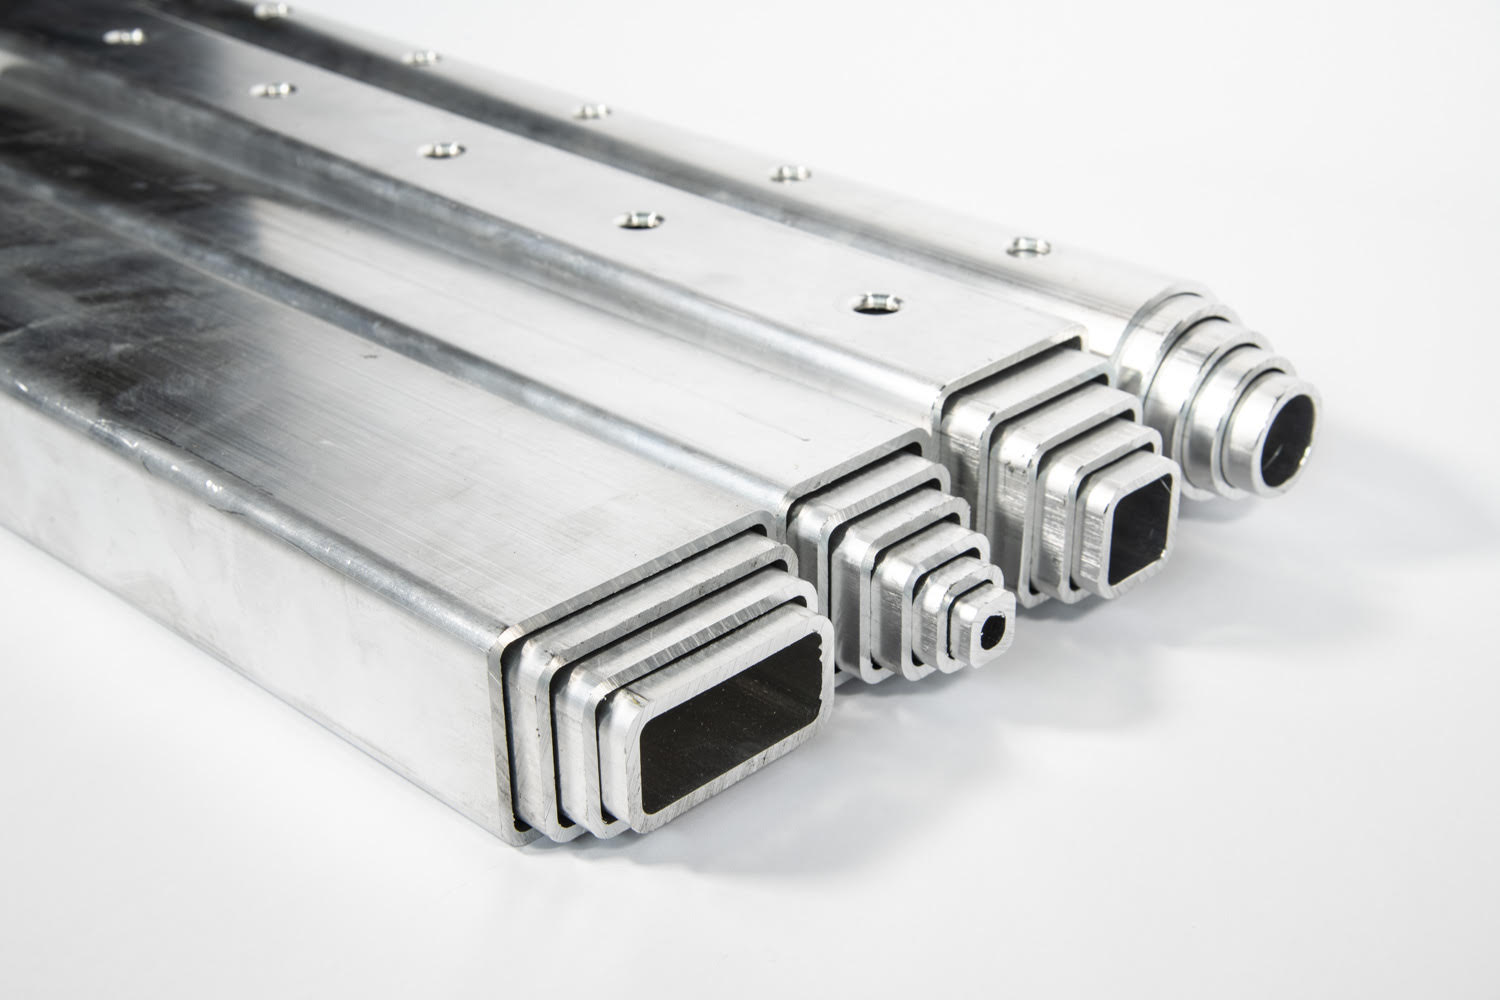 Telescopic Tubing - Alcobra Metals Telescoping Tubes For Lateral Stability